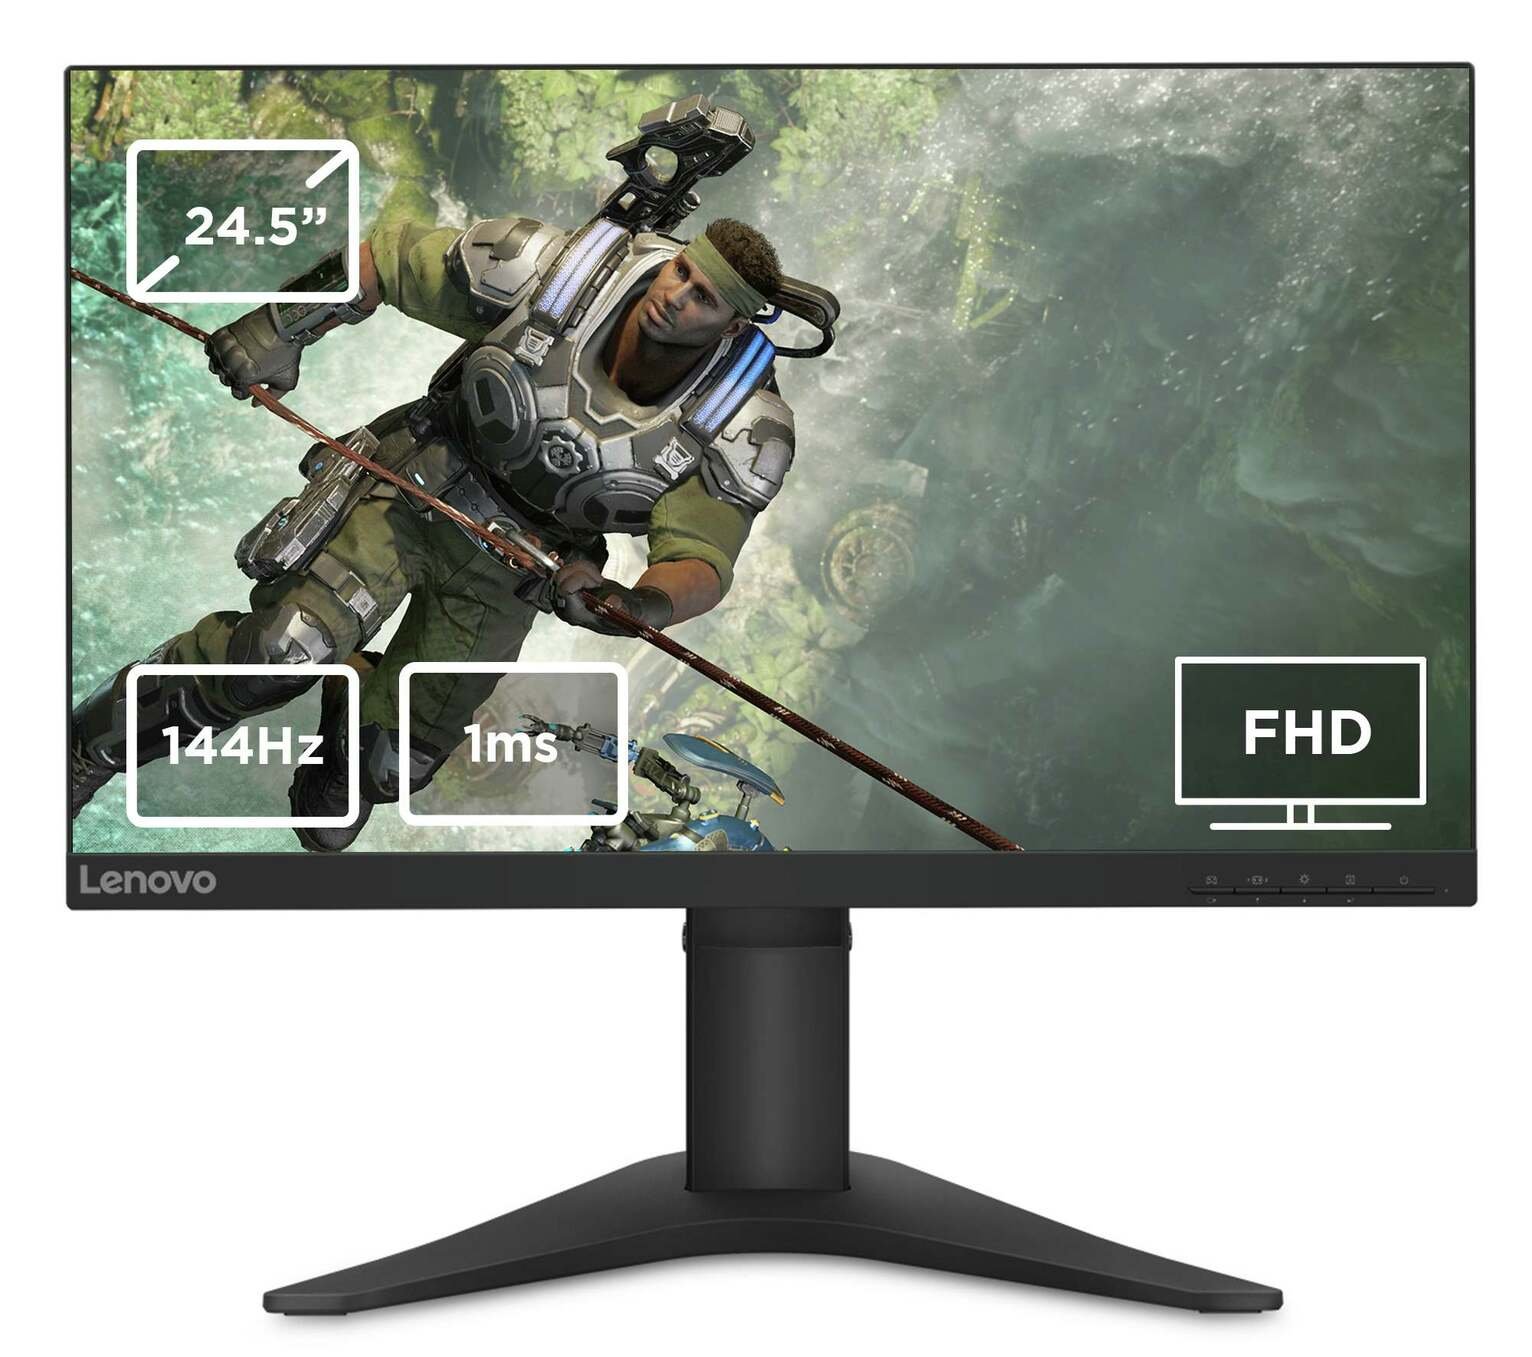 Lenovo G25-10 24.5in 144Hz FHD Gaming Monitor Review